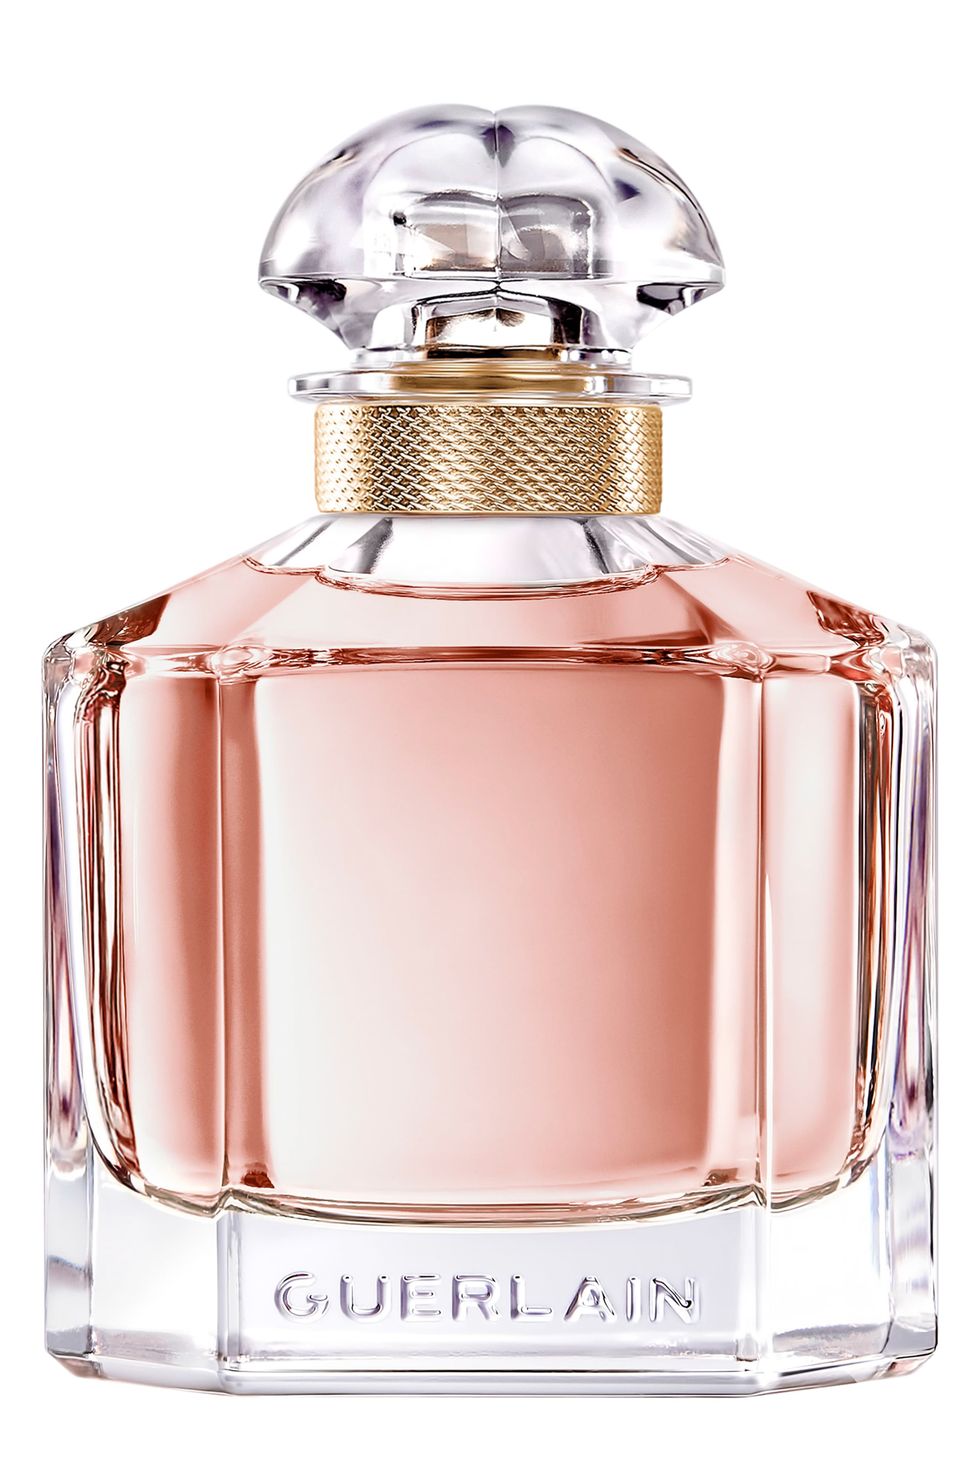 TOP 8 CLASSY - SOPHISTICATED  BEST ELEGANT PERFUMES FOR WOMEN 